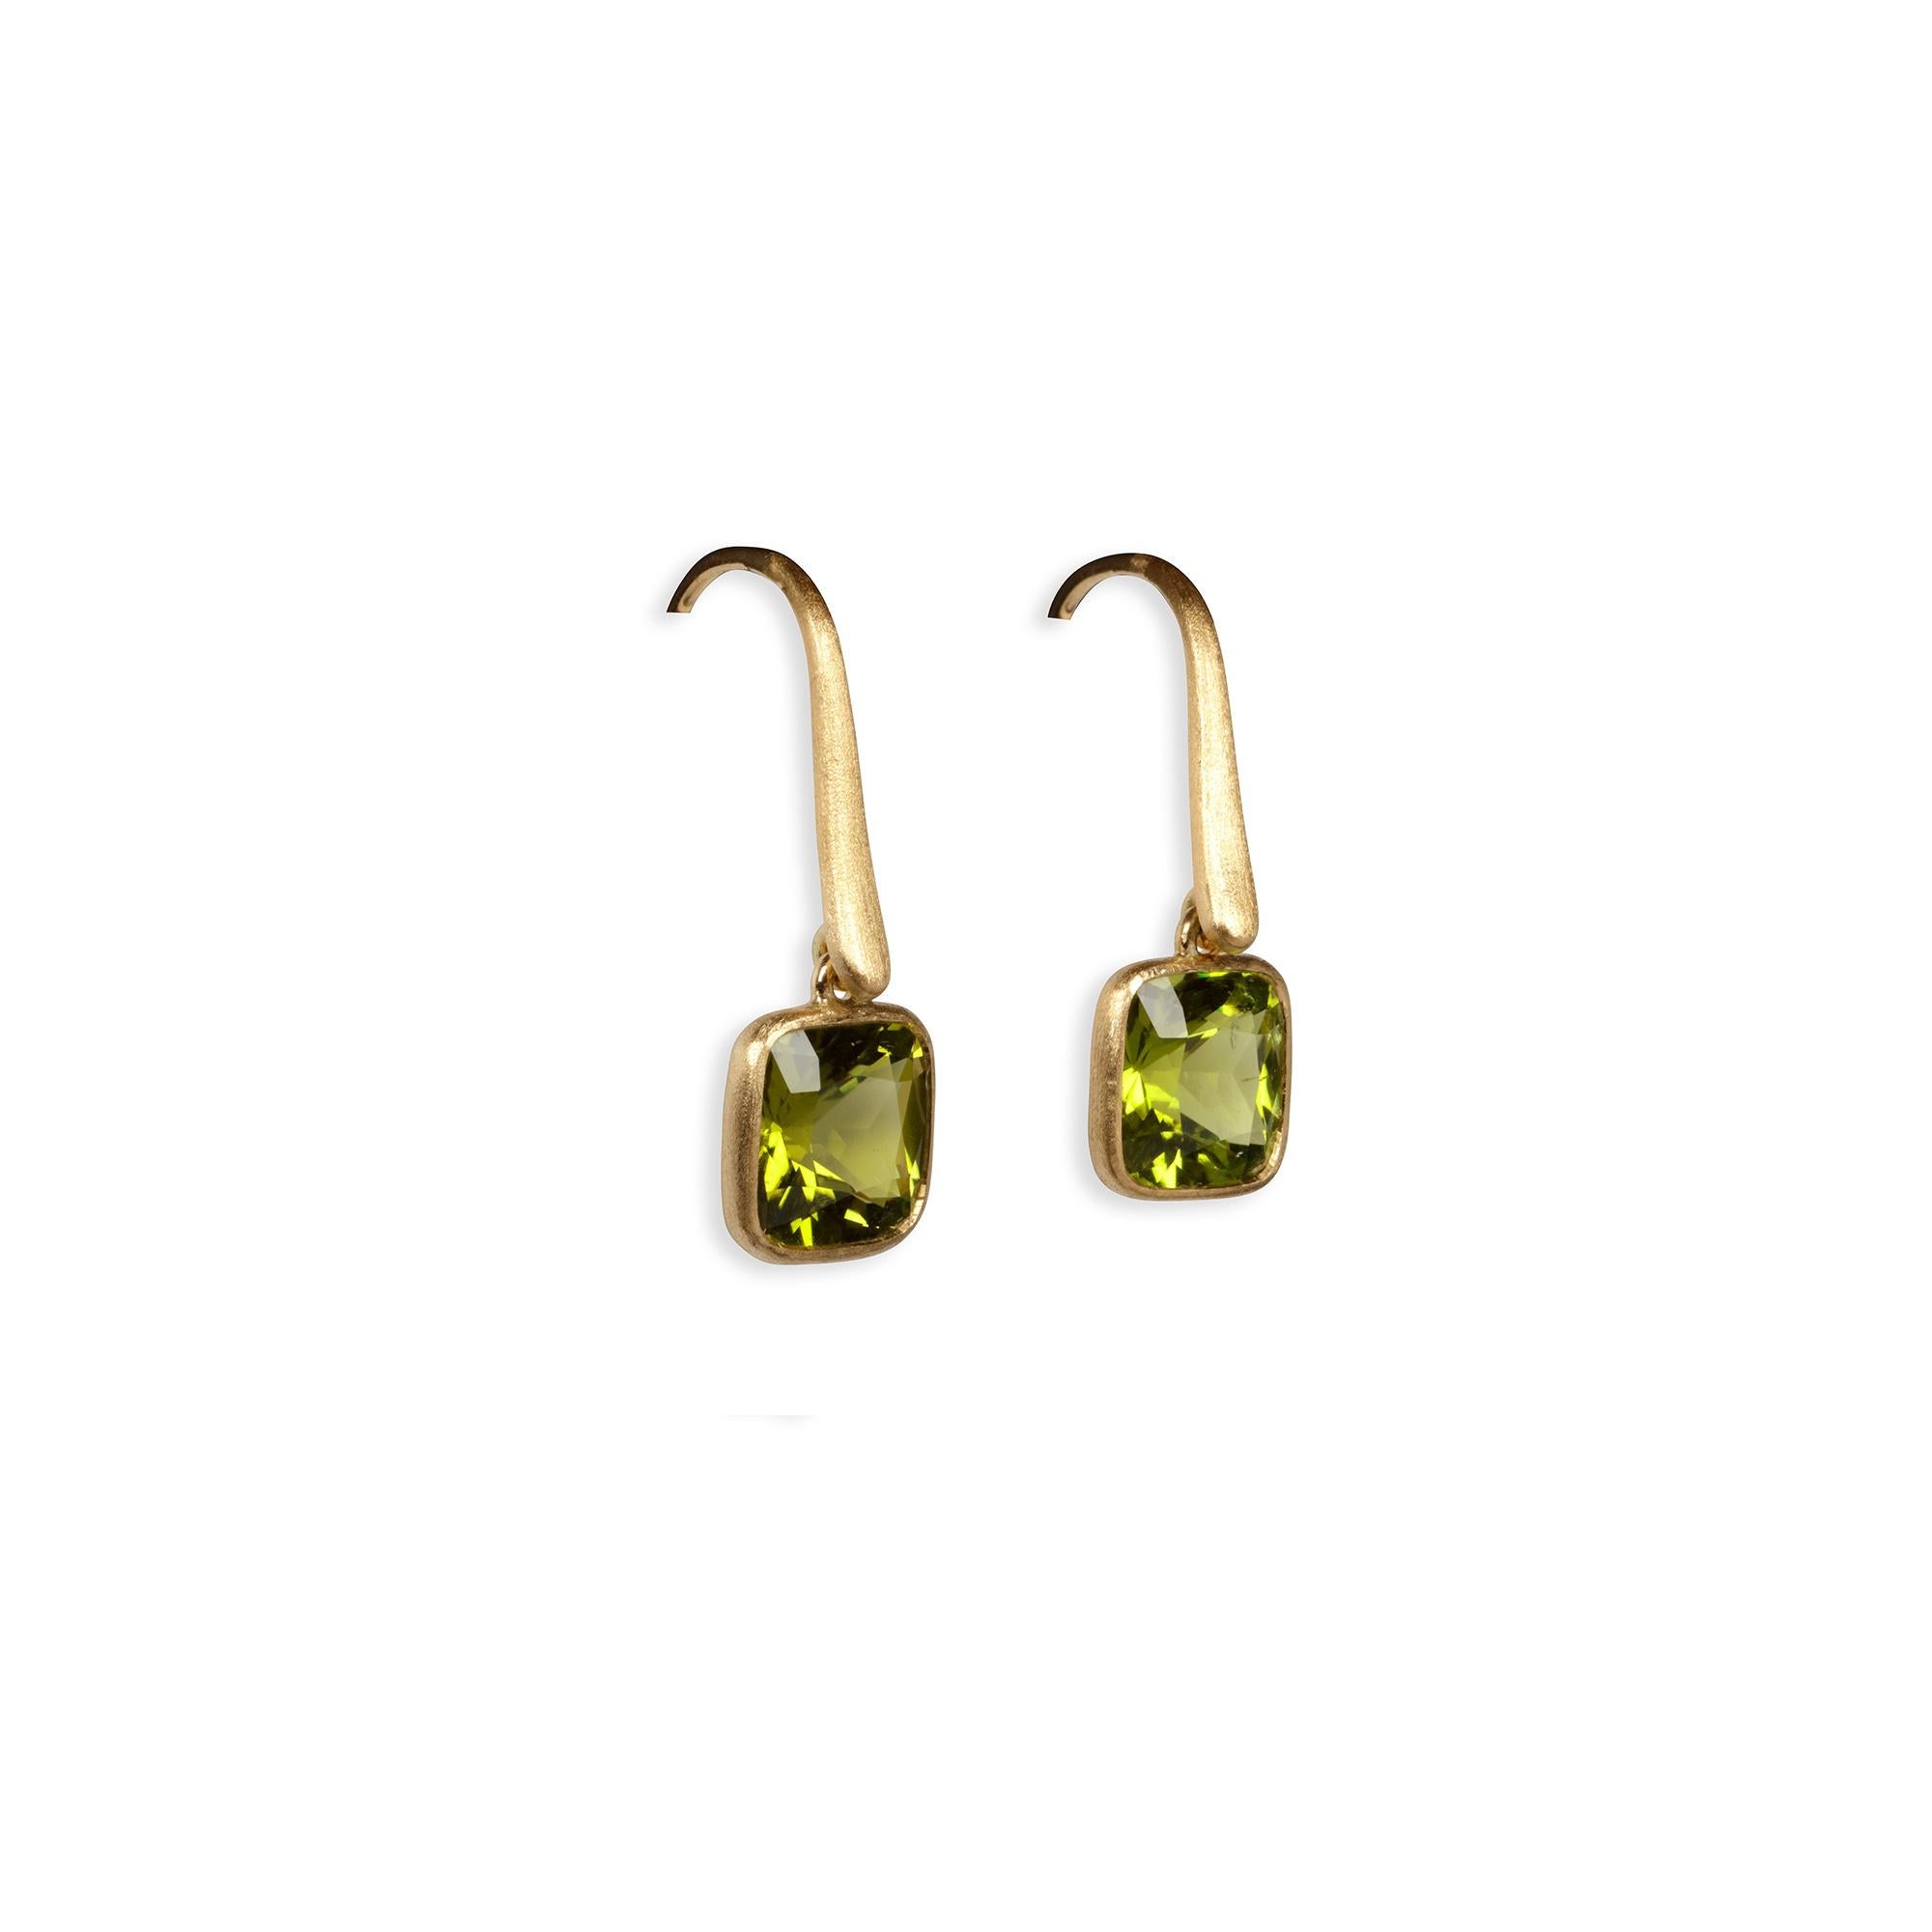 These 4.86-carat lusciously green peridot earrings create an effortless elegance and are the perfect addition to your wardrobe. Each earring has a slender tendril of 18-karat matte yellow gold that delicately sweeps down to be met by a glowing